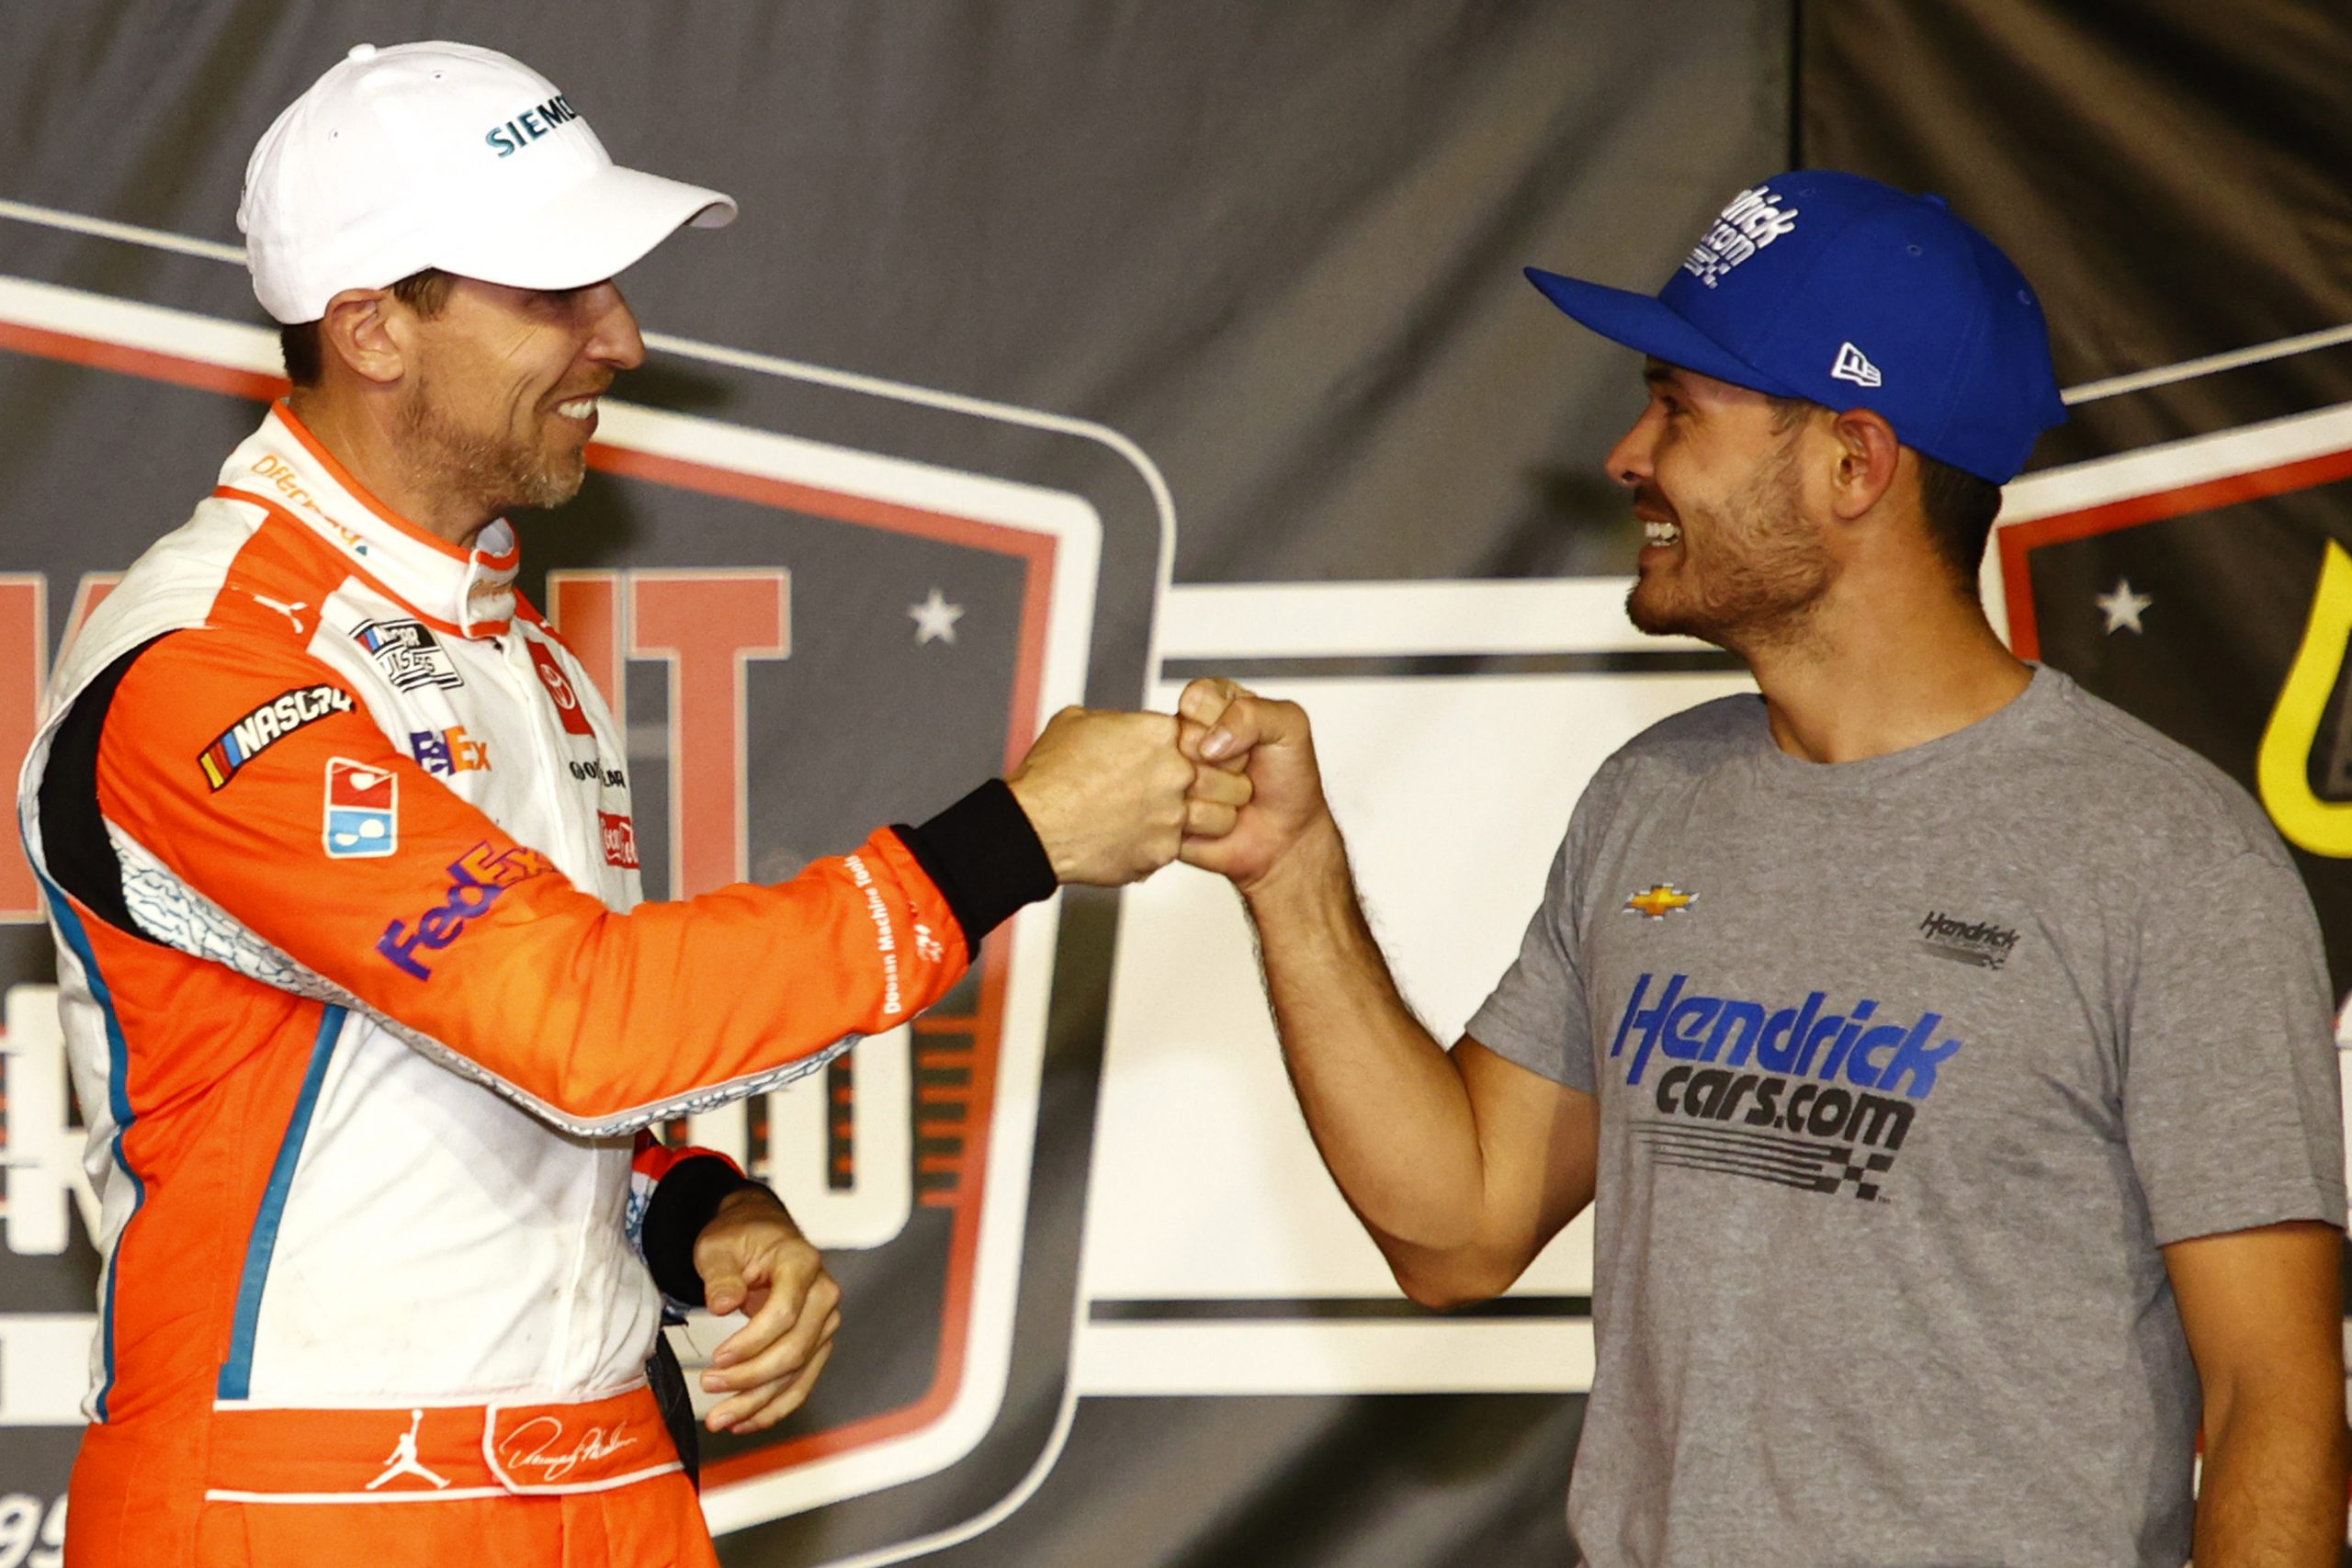 Kyle Larson, right, congratulates Denny Hamlin on victory lane after the NASCAR Cup Series Cook Out Southern 500 at Darlington Raceway on Sept. 5, 2021.